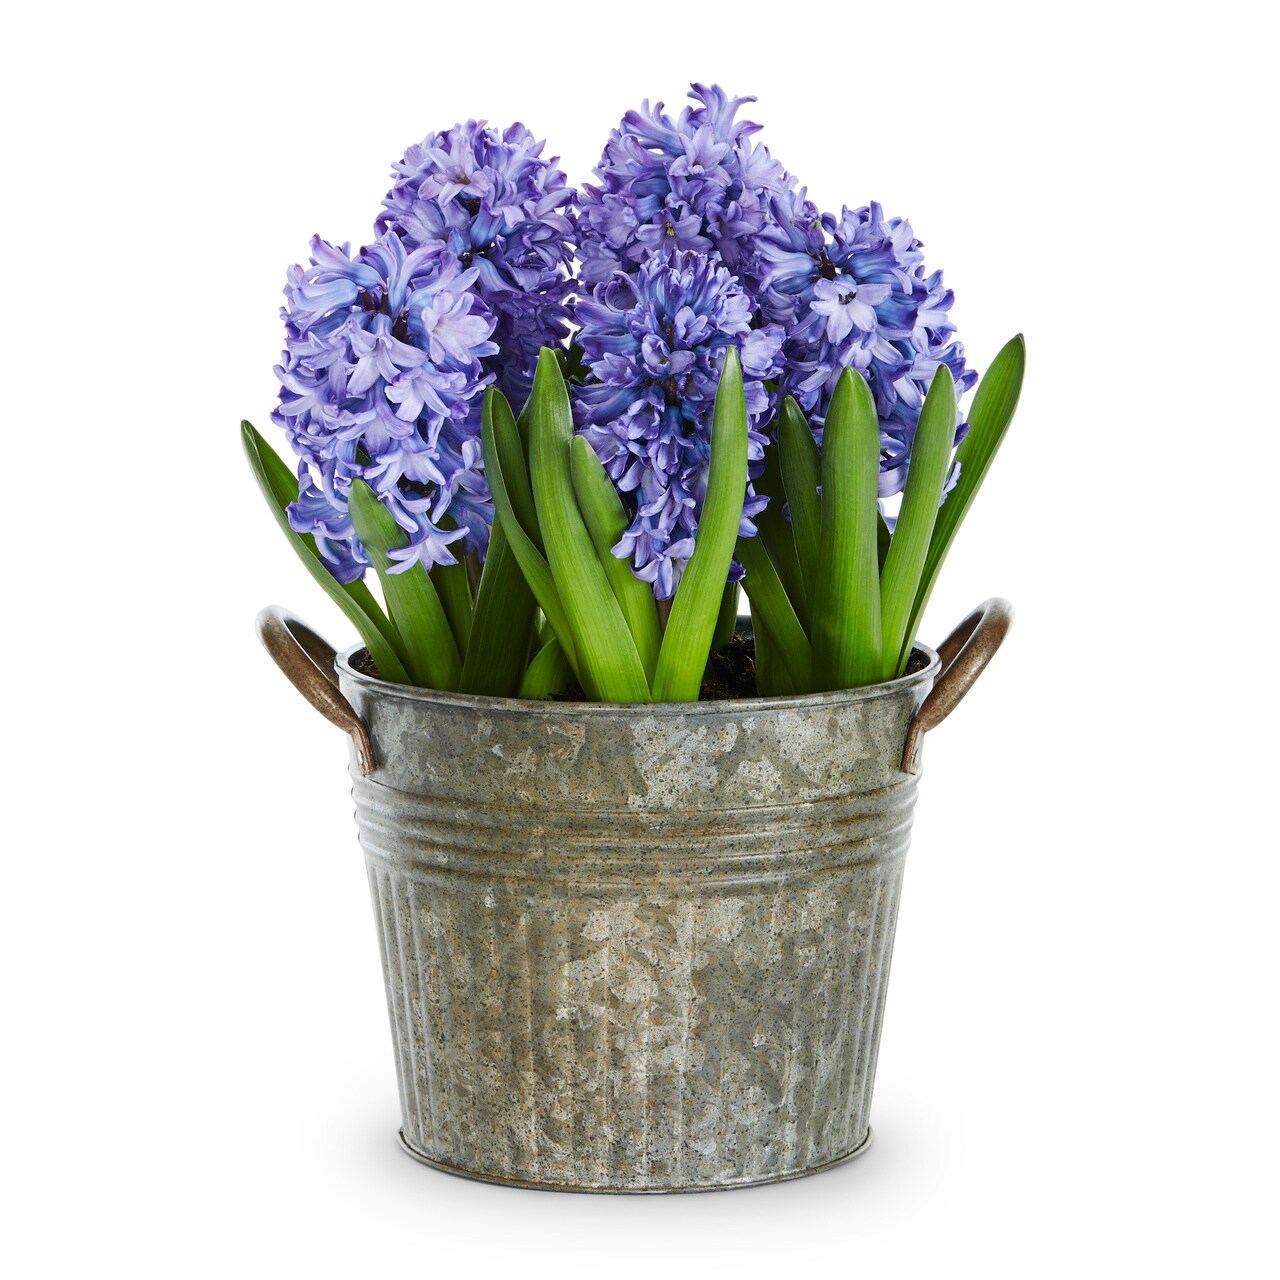 Set of 3 Artificial Blue Hyacinth With Leaves Spring Flowering Bulb 